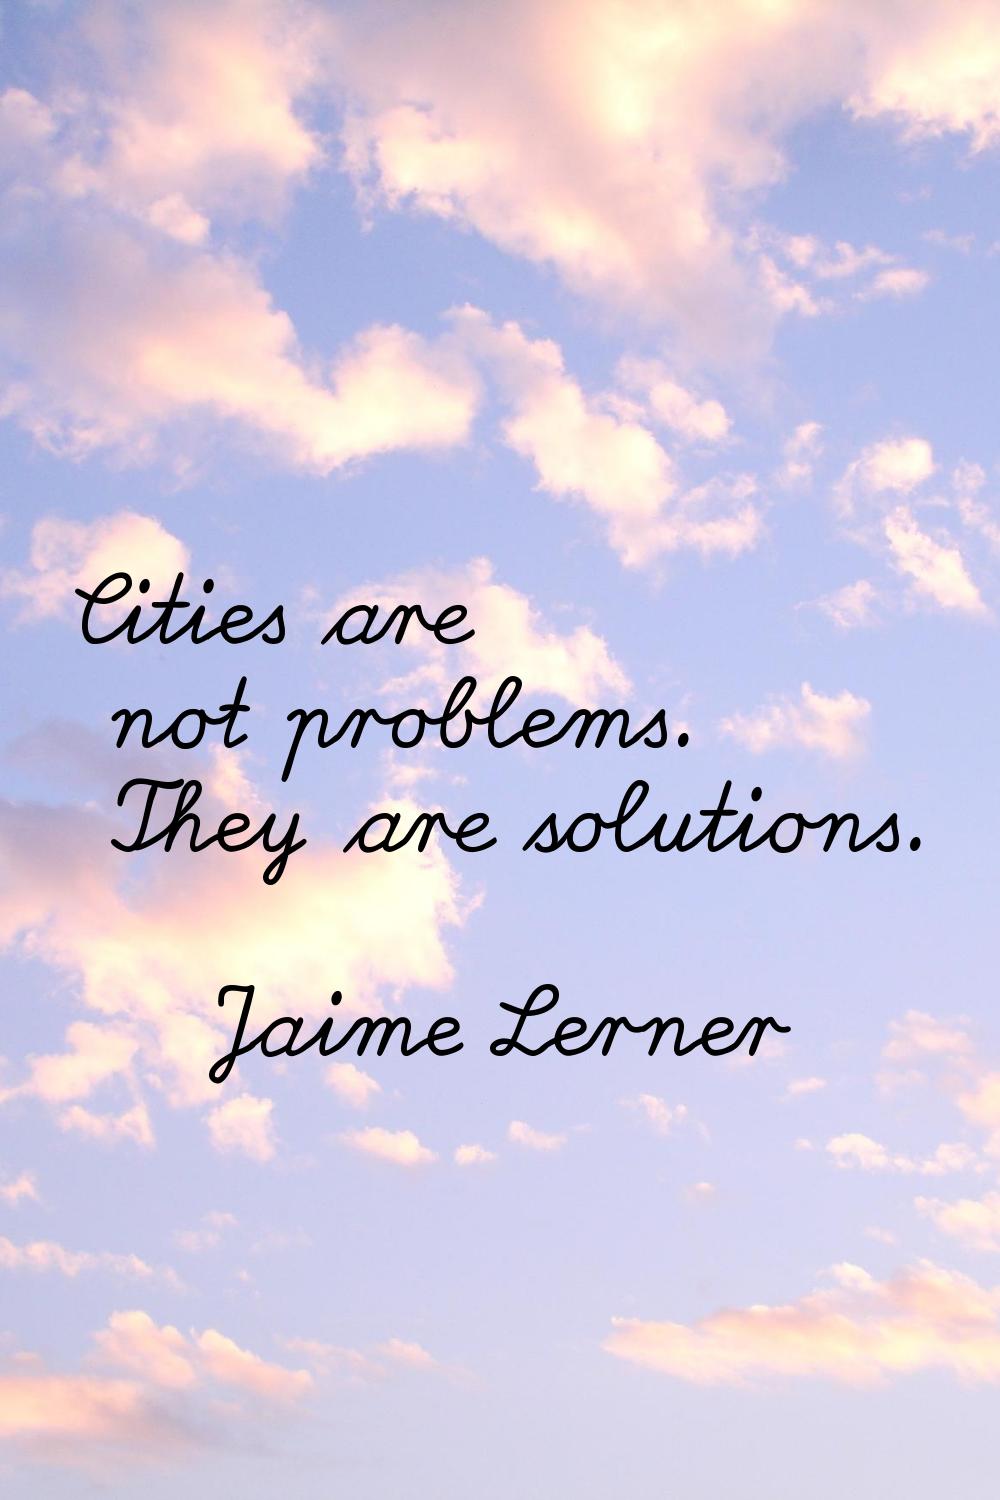 Cities are not problems. They are solutions.